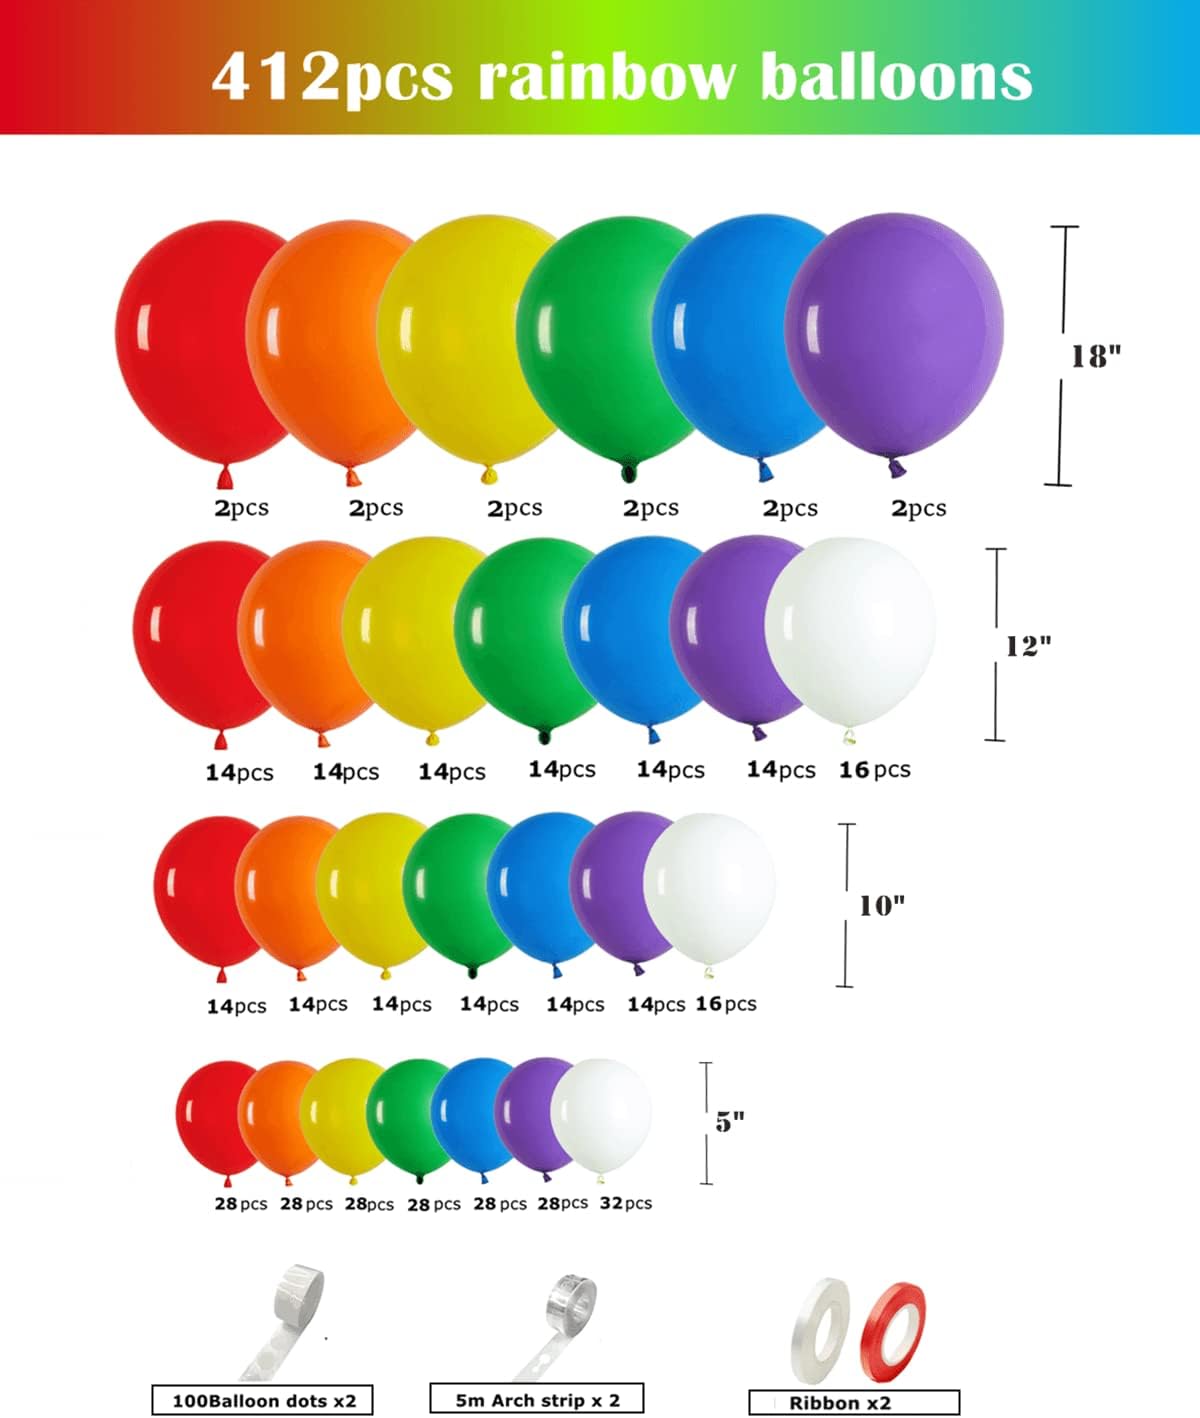 412pcs Rainbow Balloon Arch Kit Assorted Colors 18 12 10 5 Inch, Different Sizes Matte Latex Colorful Balloons for Baby Shower Birthday Wedding Party Decorations